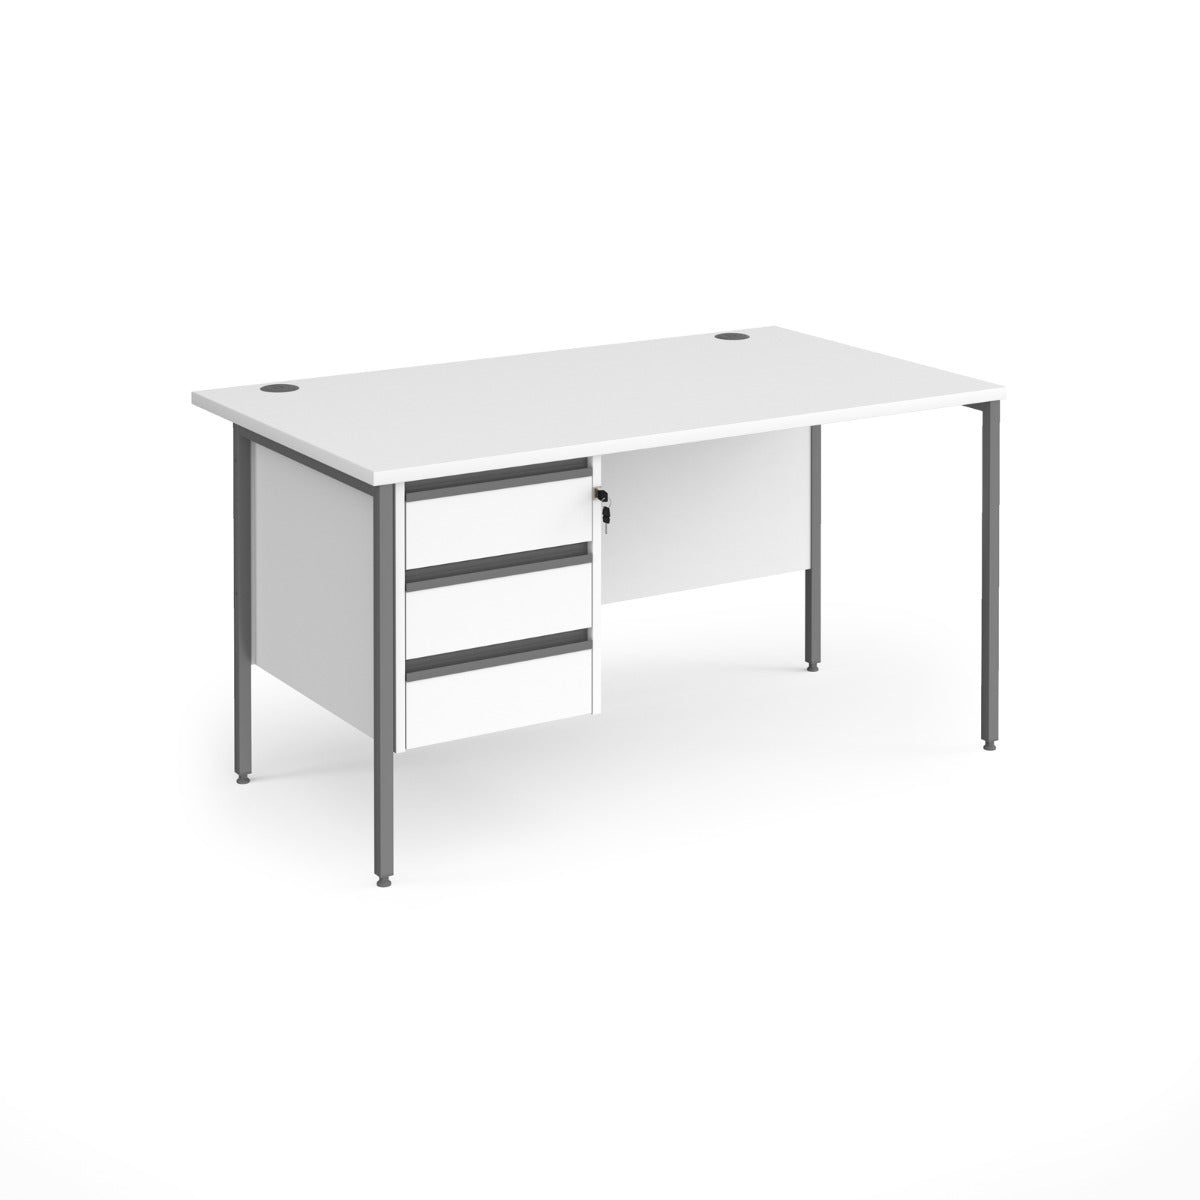 Contract H Frame Straight Office Desk with Three Drawer Storage